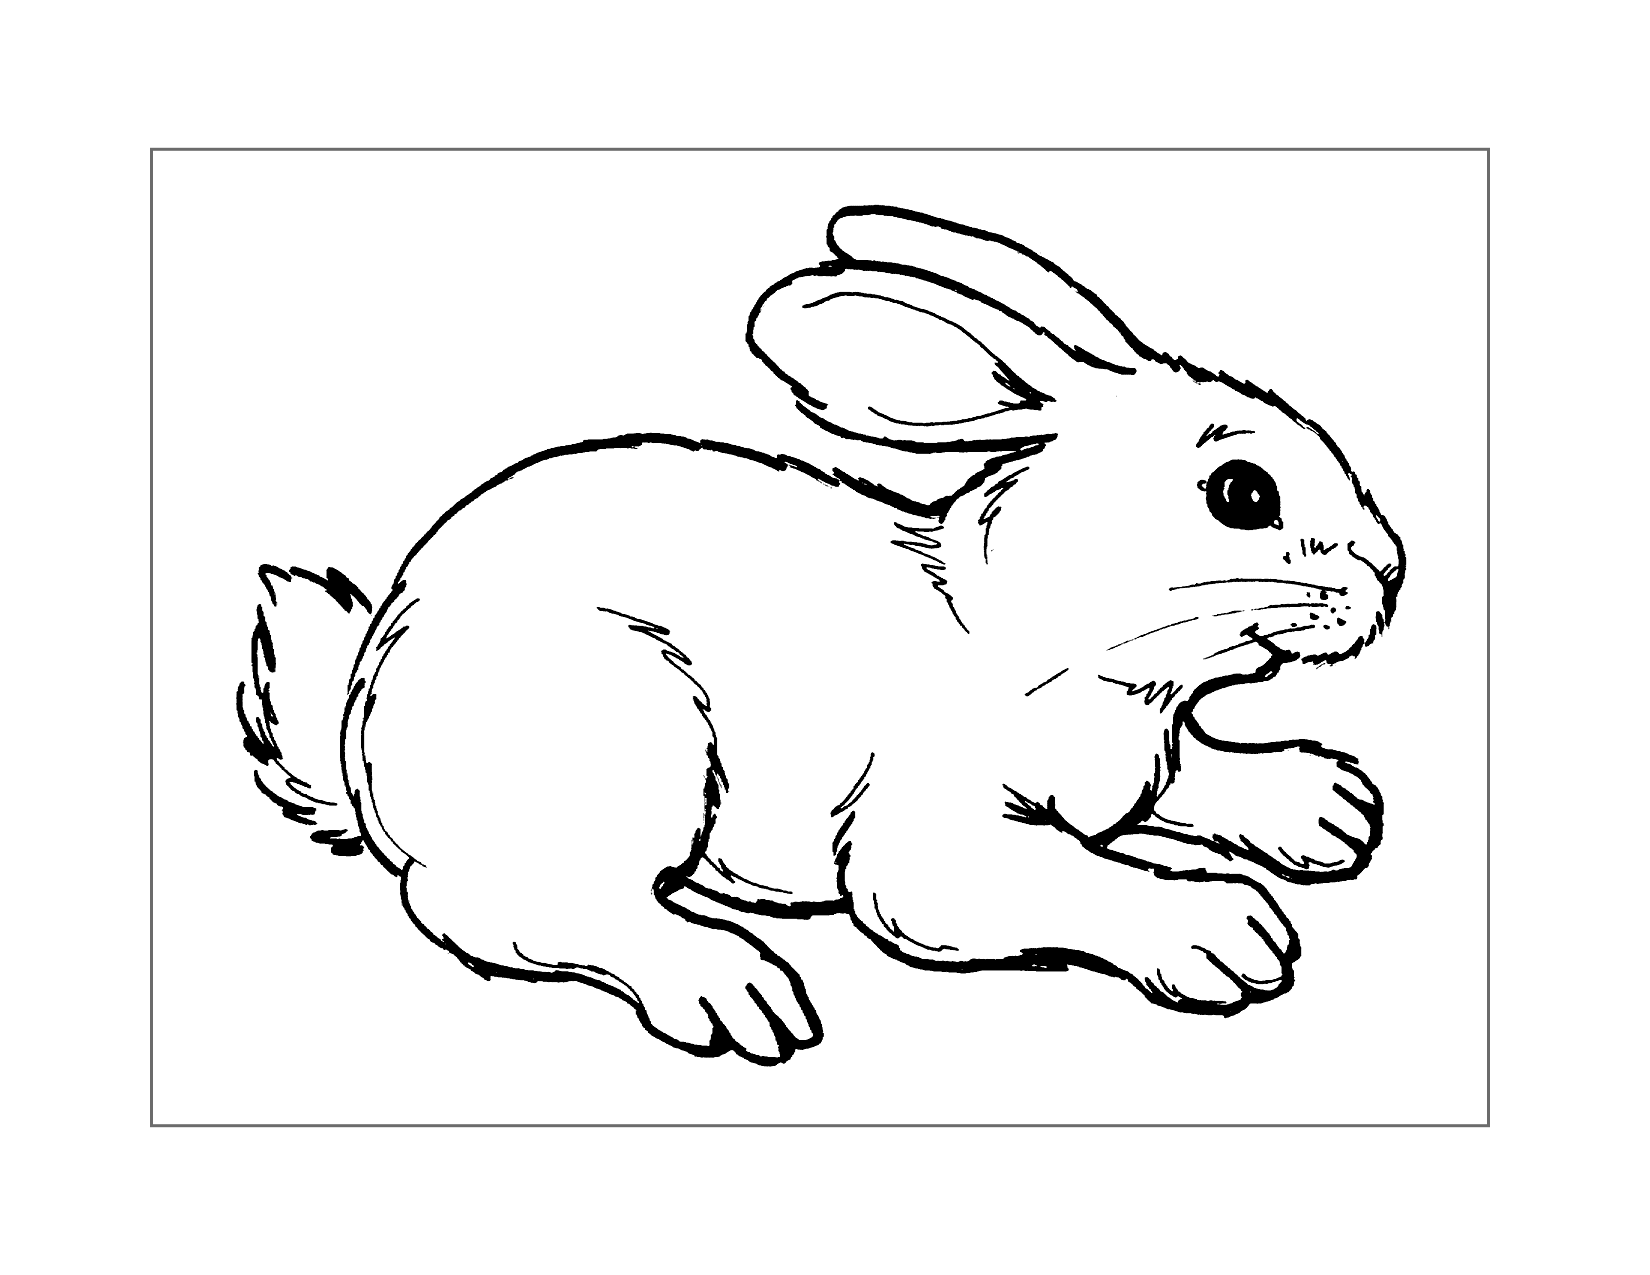 Fluffy Rabbit Coloring Page